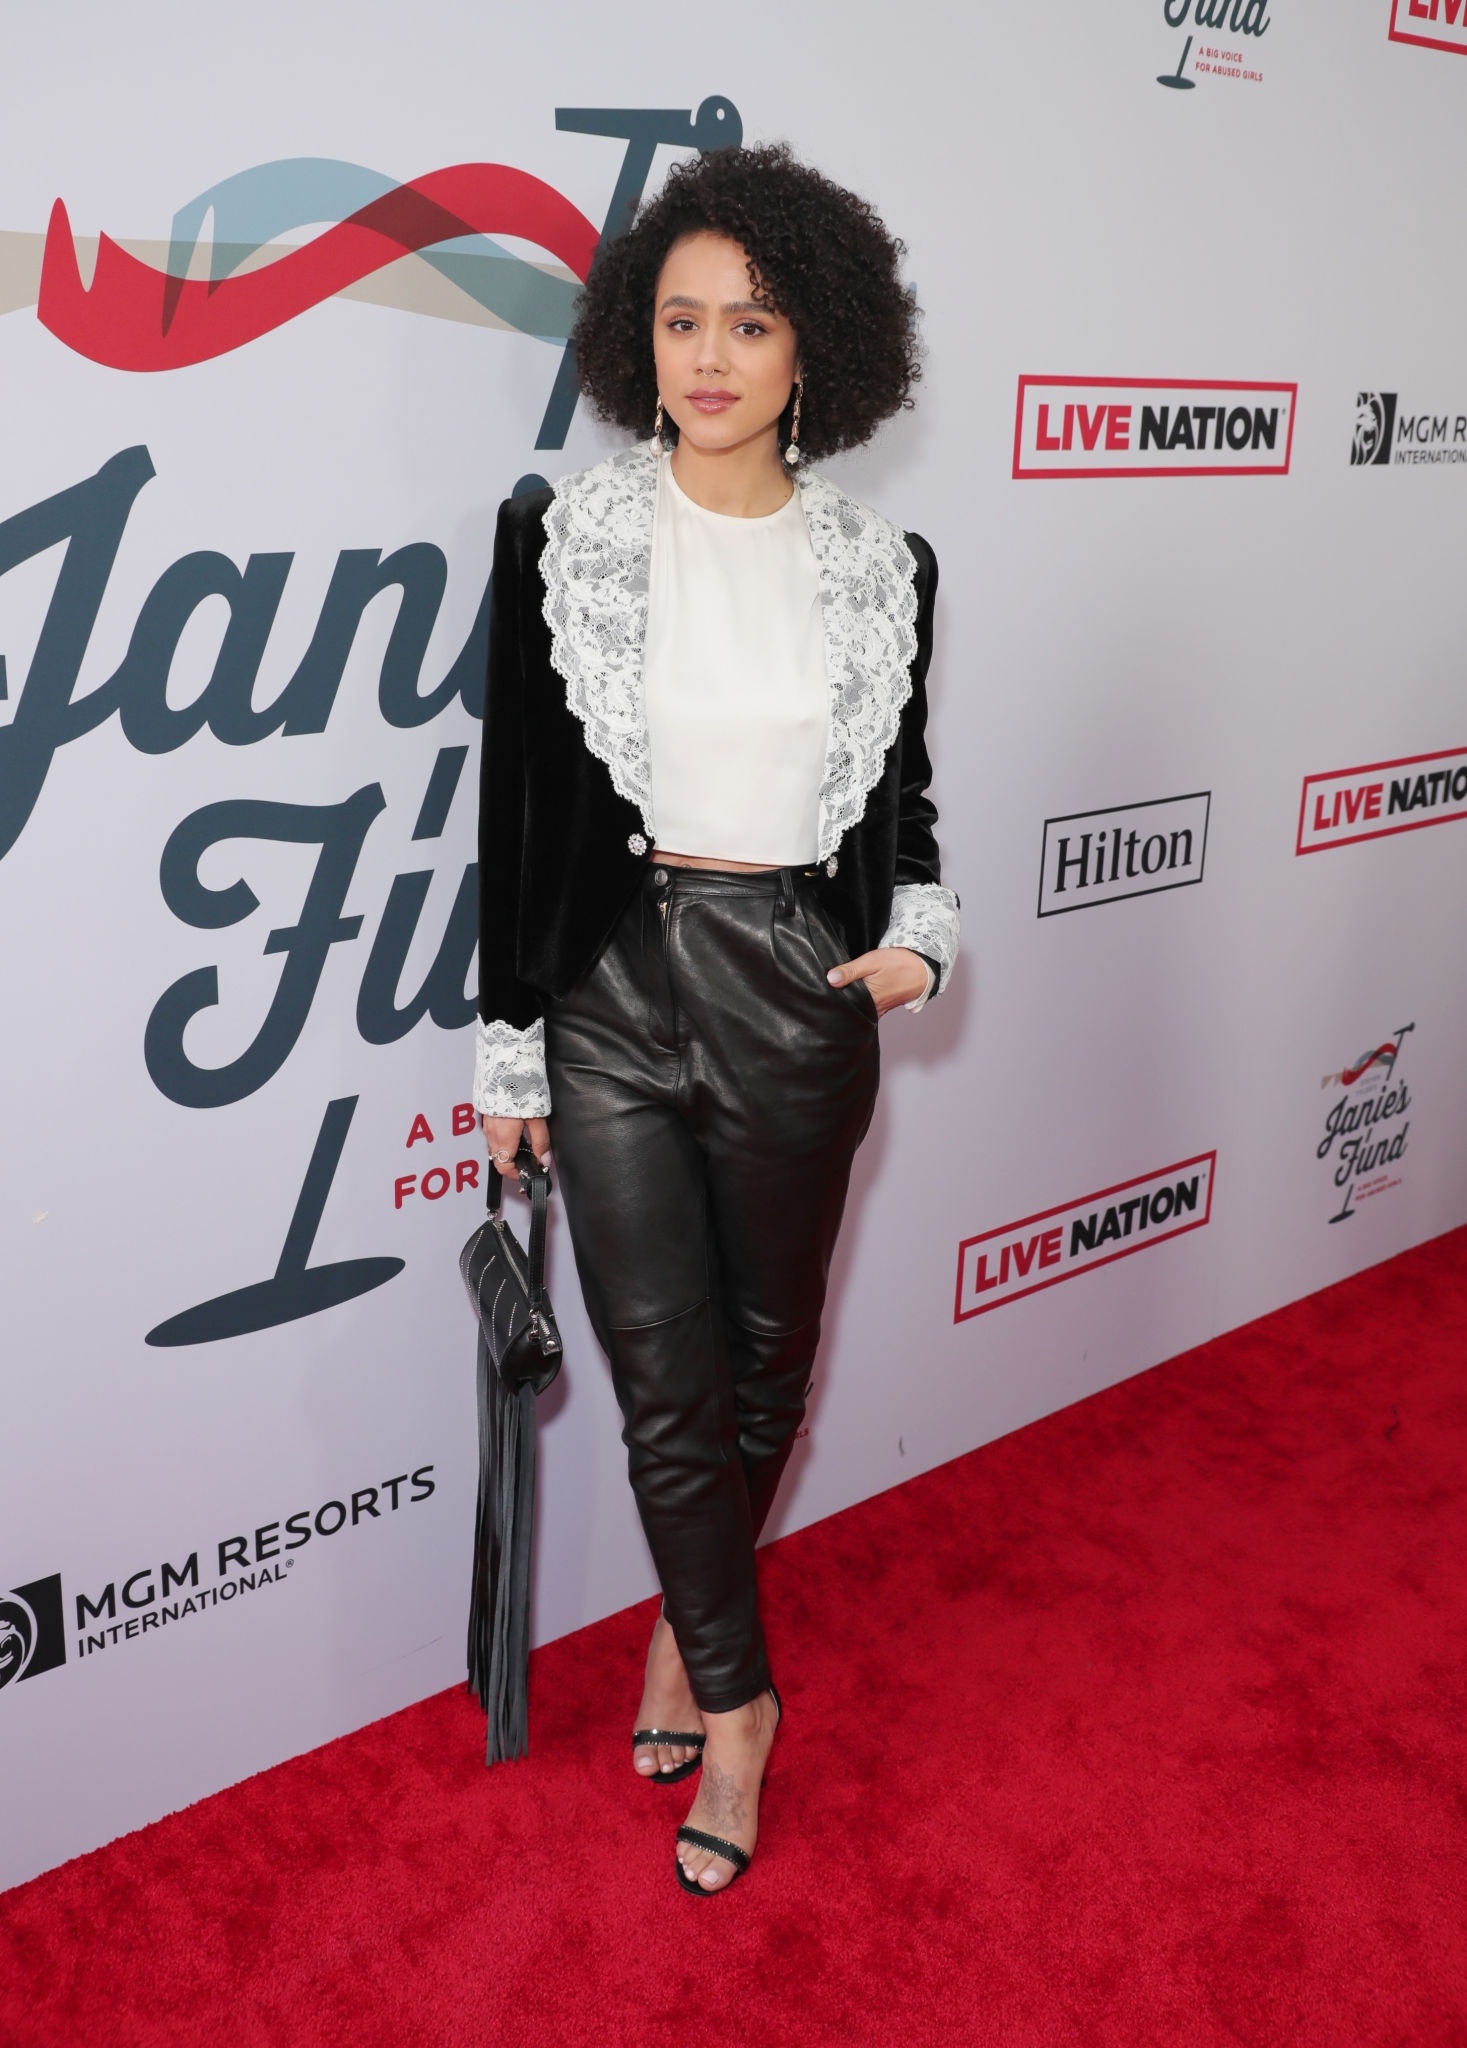 Nathalie Emmanuel at the 3rd Annual Steven Tyler GRAMMY Viewing Party